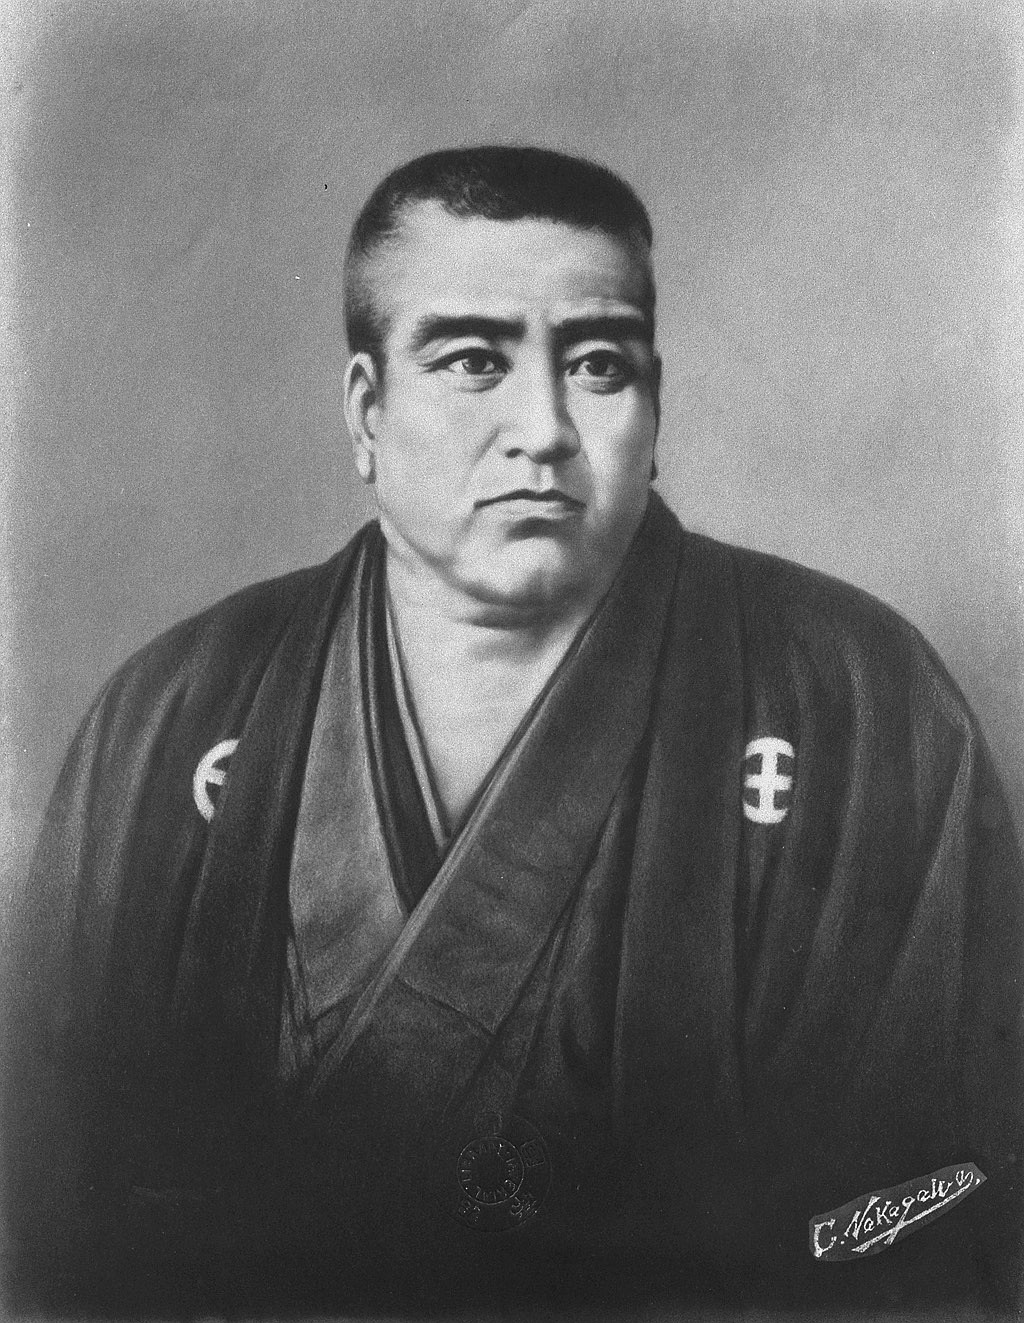 Saigo Takamori (1828-1877) was called the Last Samurai and today is considered a popular historic figure and cultural icon in Japan.